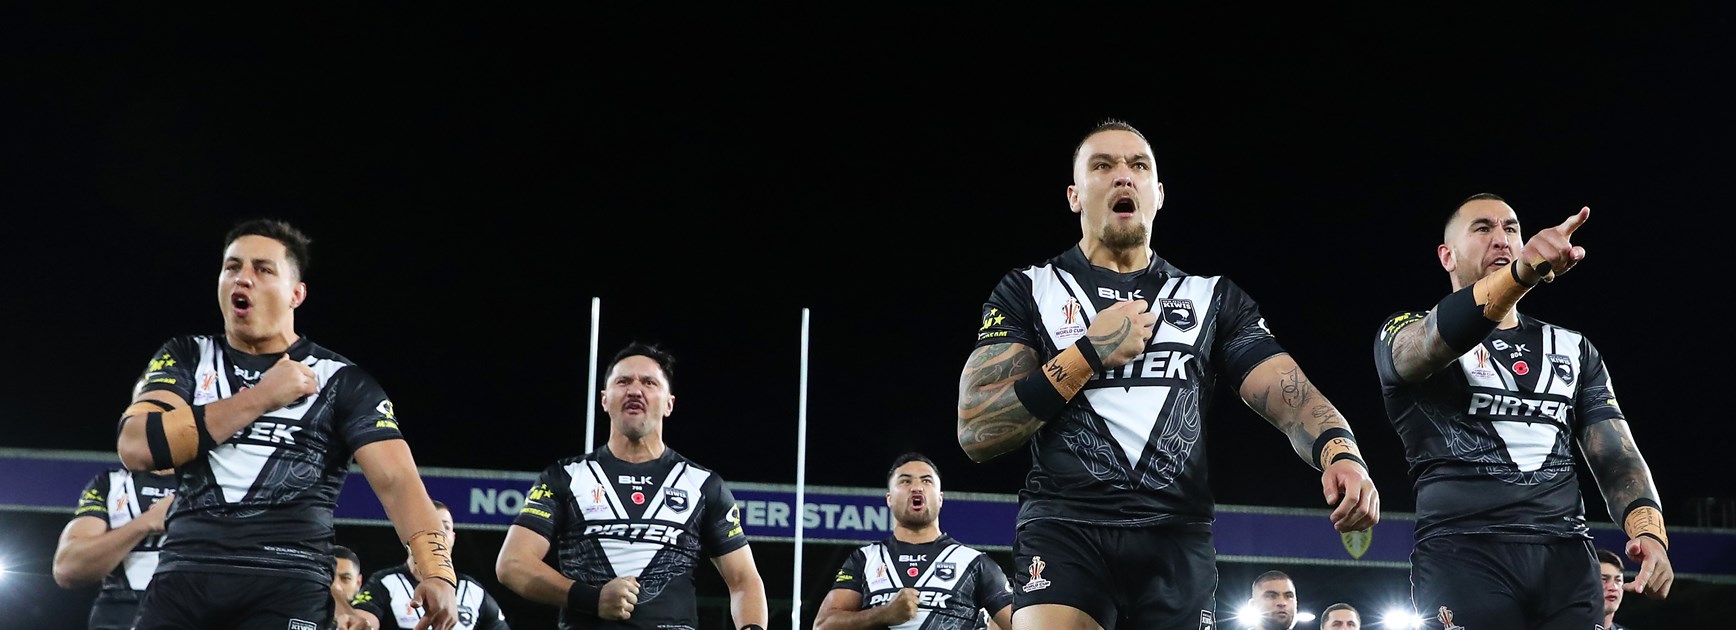 Kiwis plan to form NZ version of PM's XIII